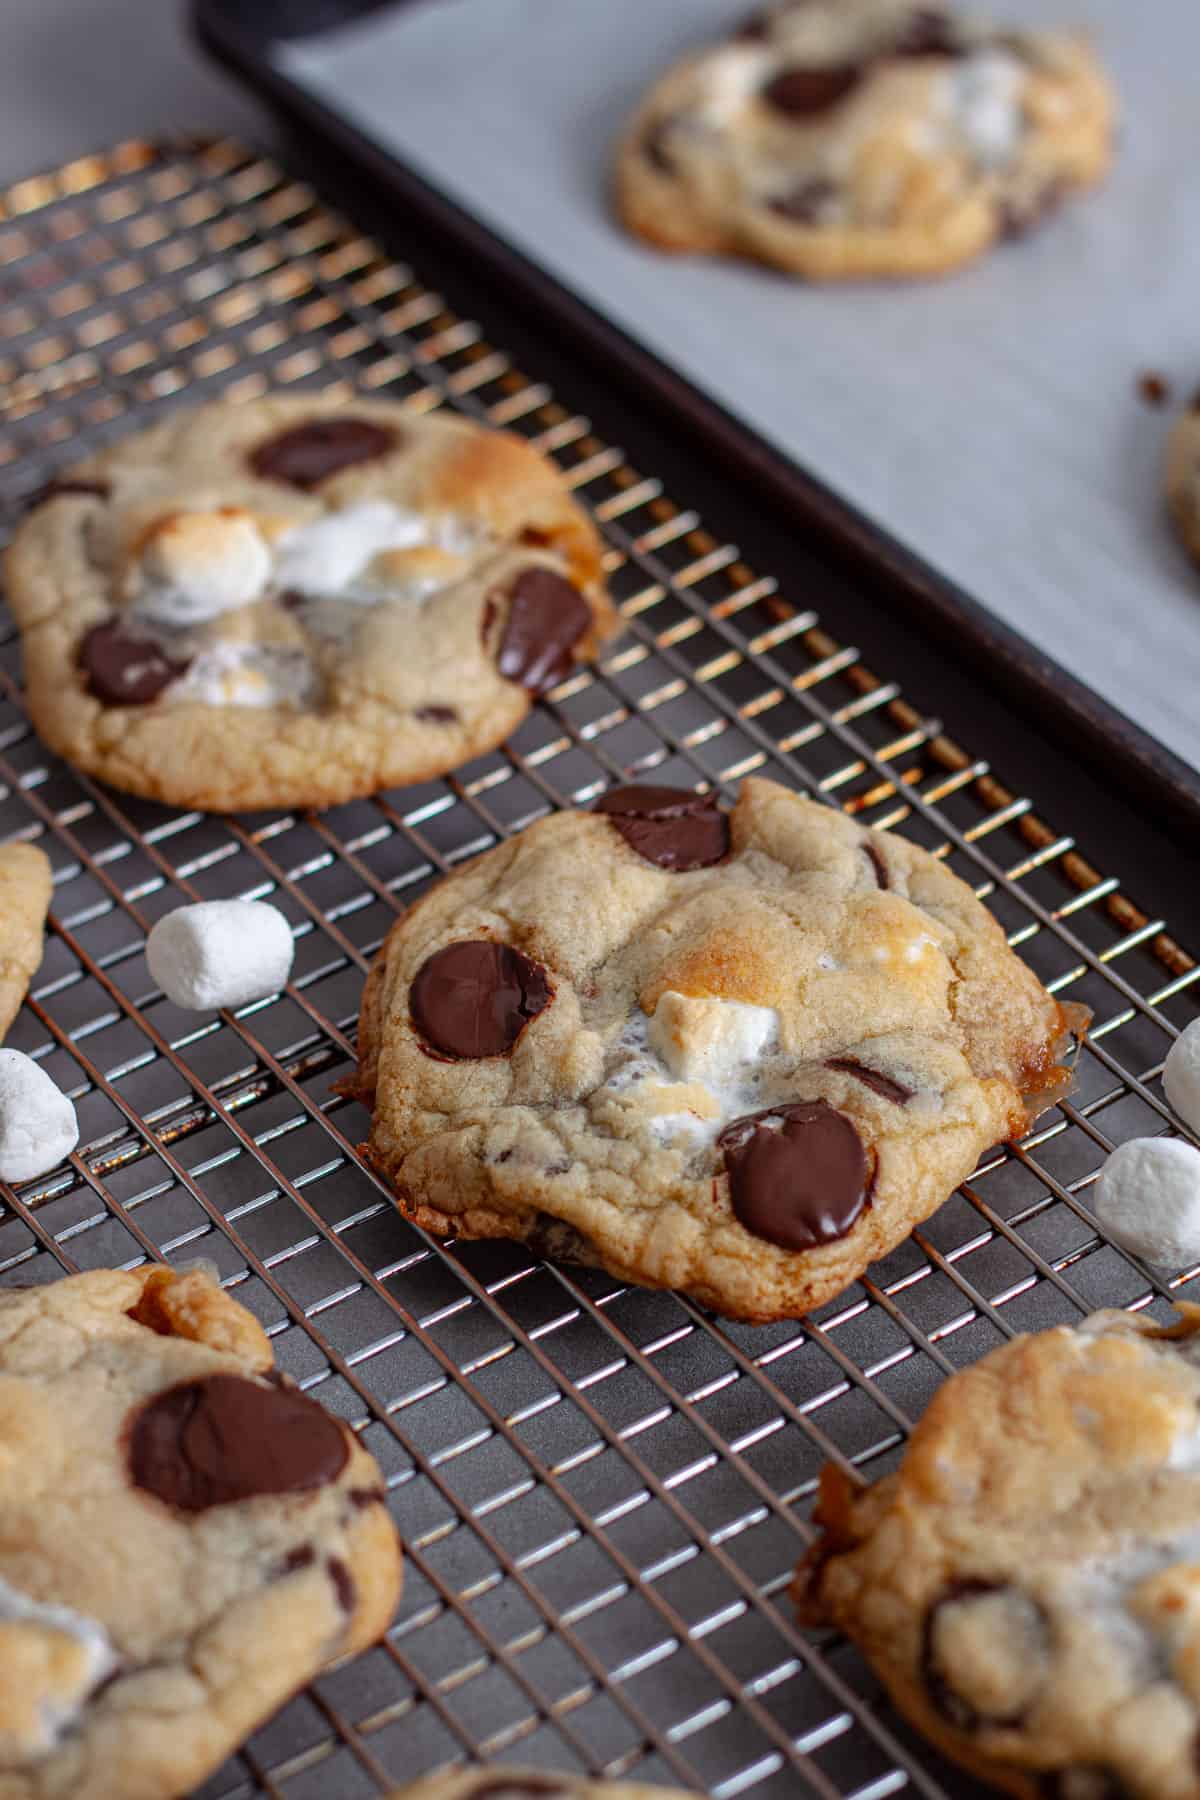 Gooey marshmallow and chocolate chip cookies cooling on a wire rack.